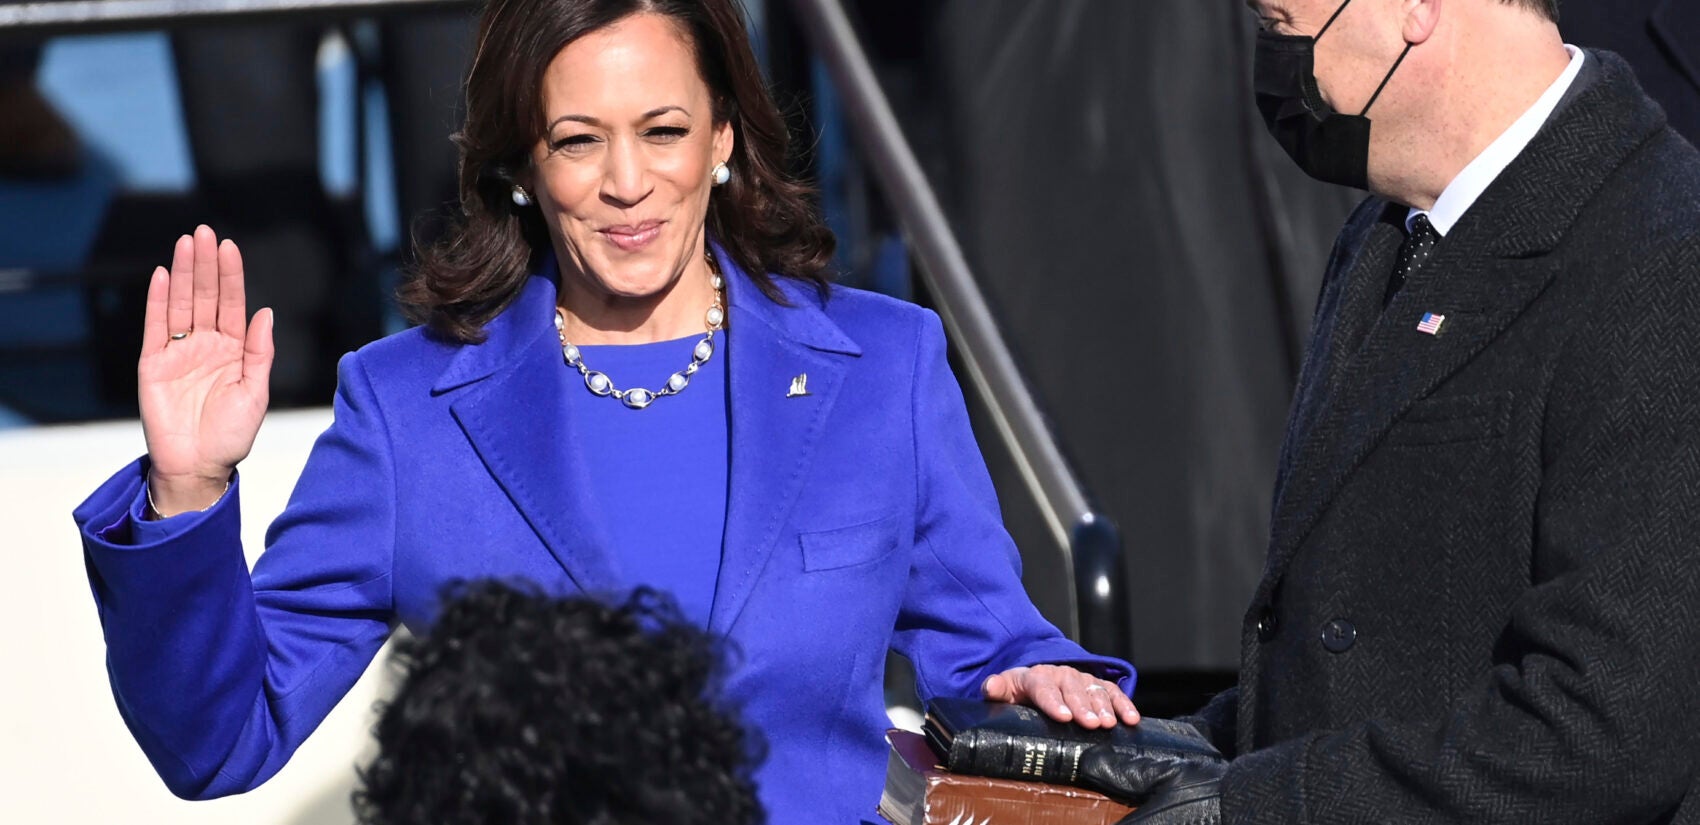 Kamala Harris is sworn in as vice president by Supreme Court Justice Sonia Sotomayor